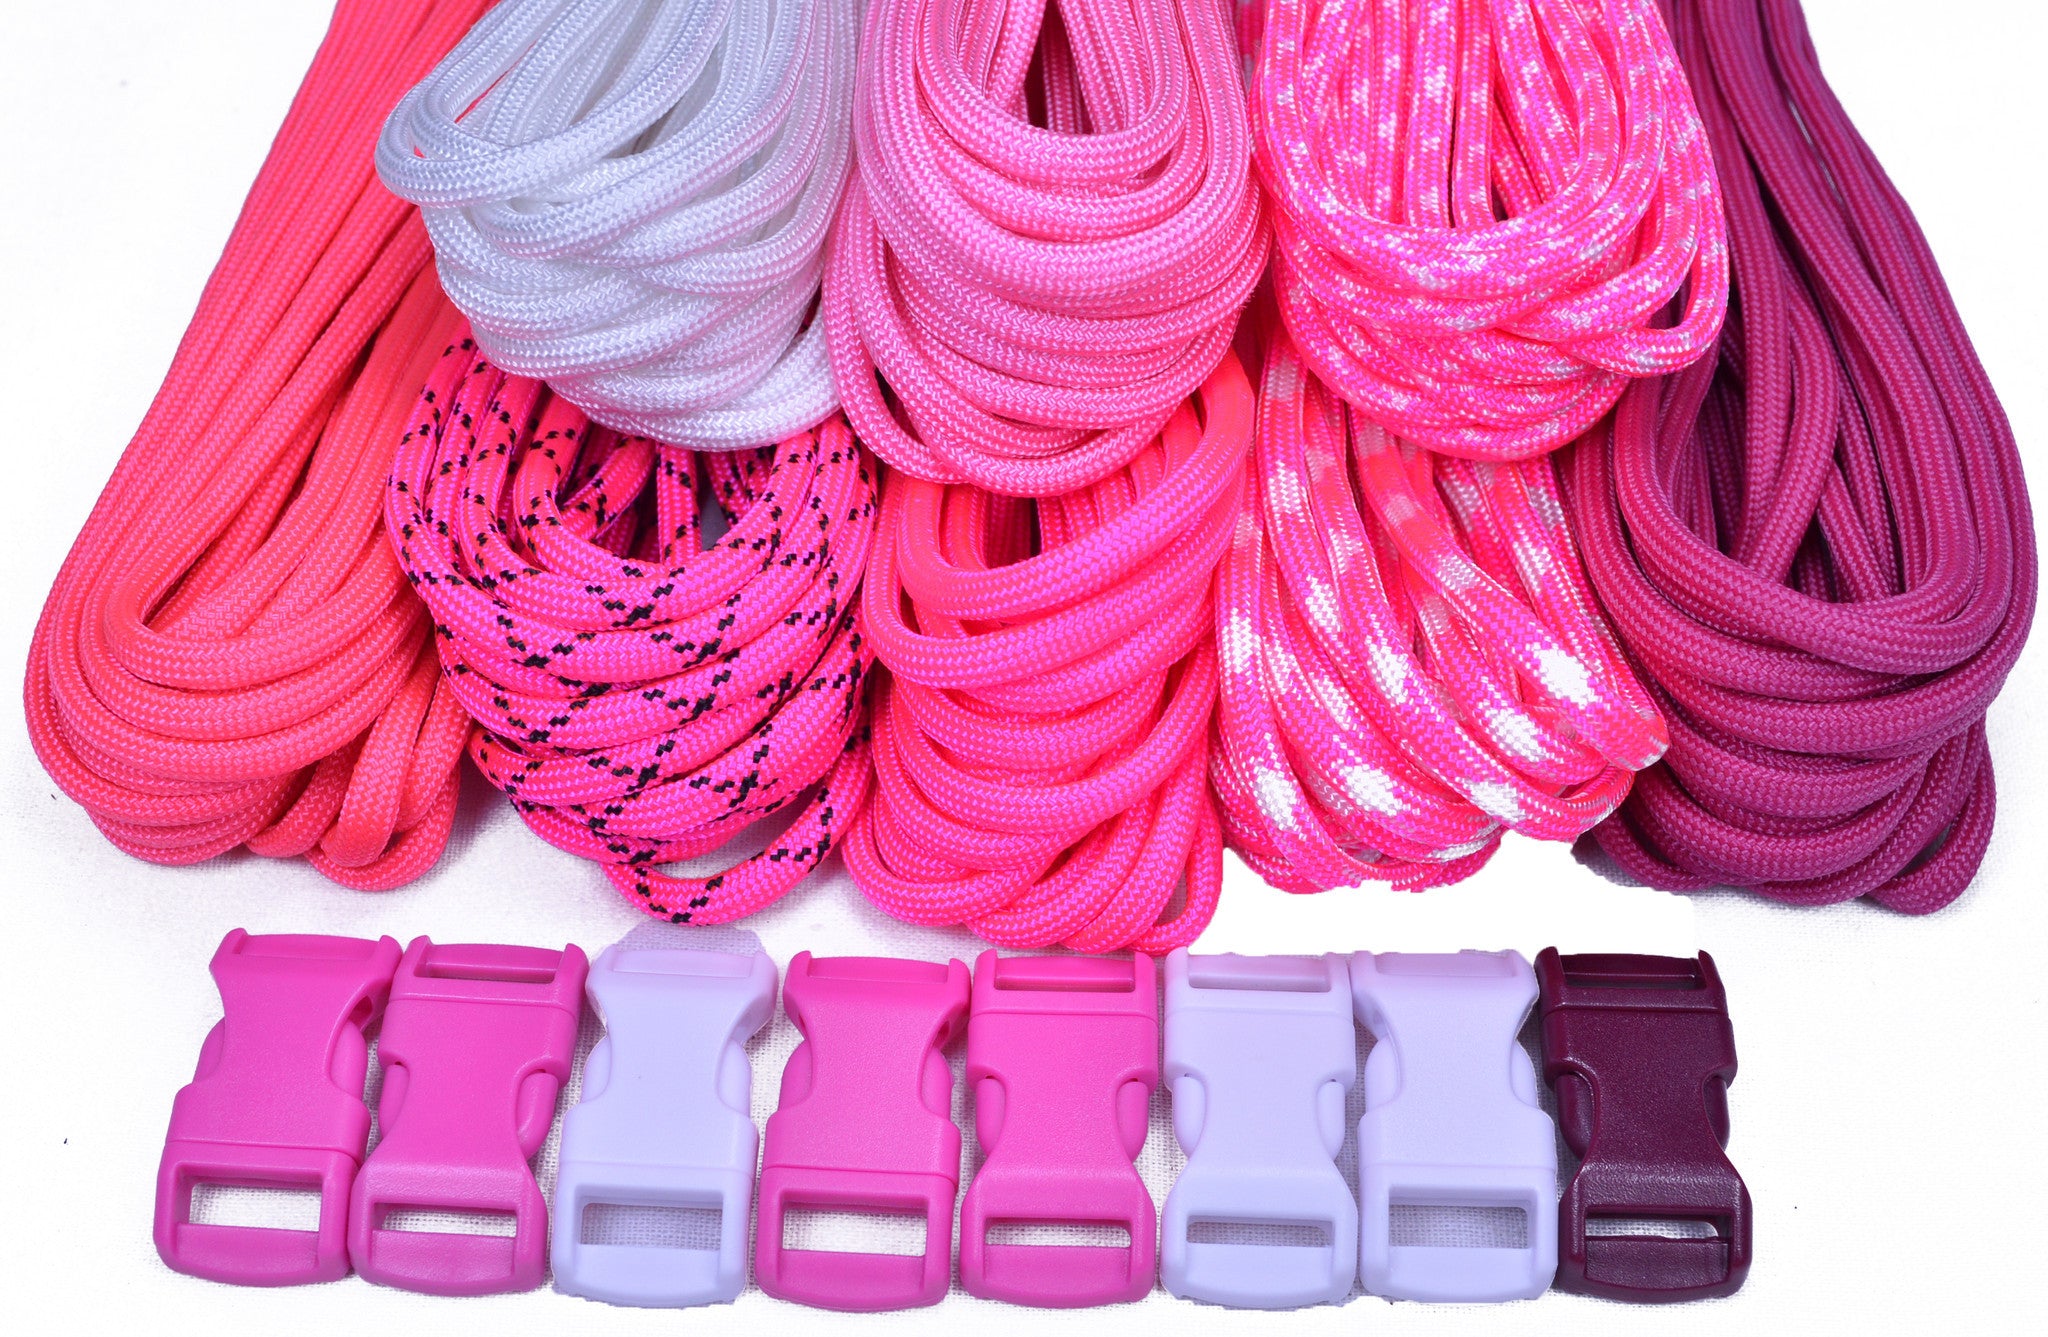 Paracord & Buckles Combo Kit - Pink Pride